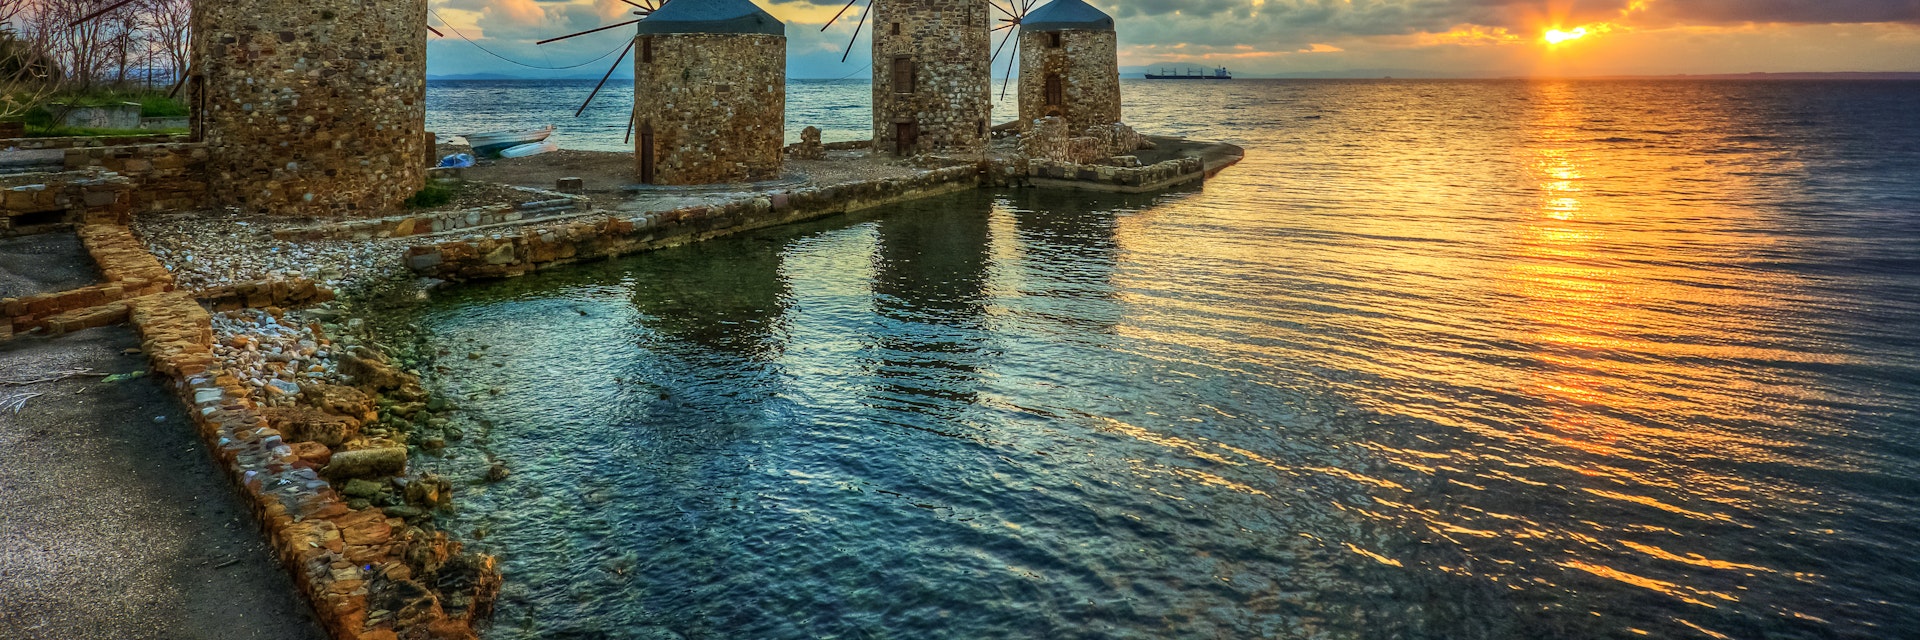 Windmills of Chios